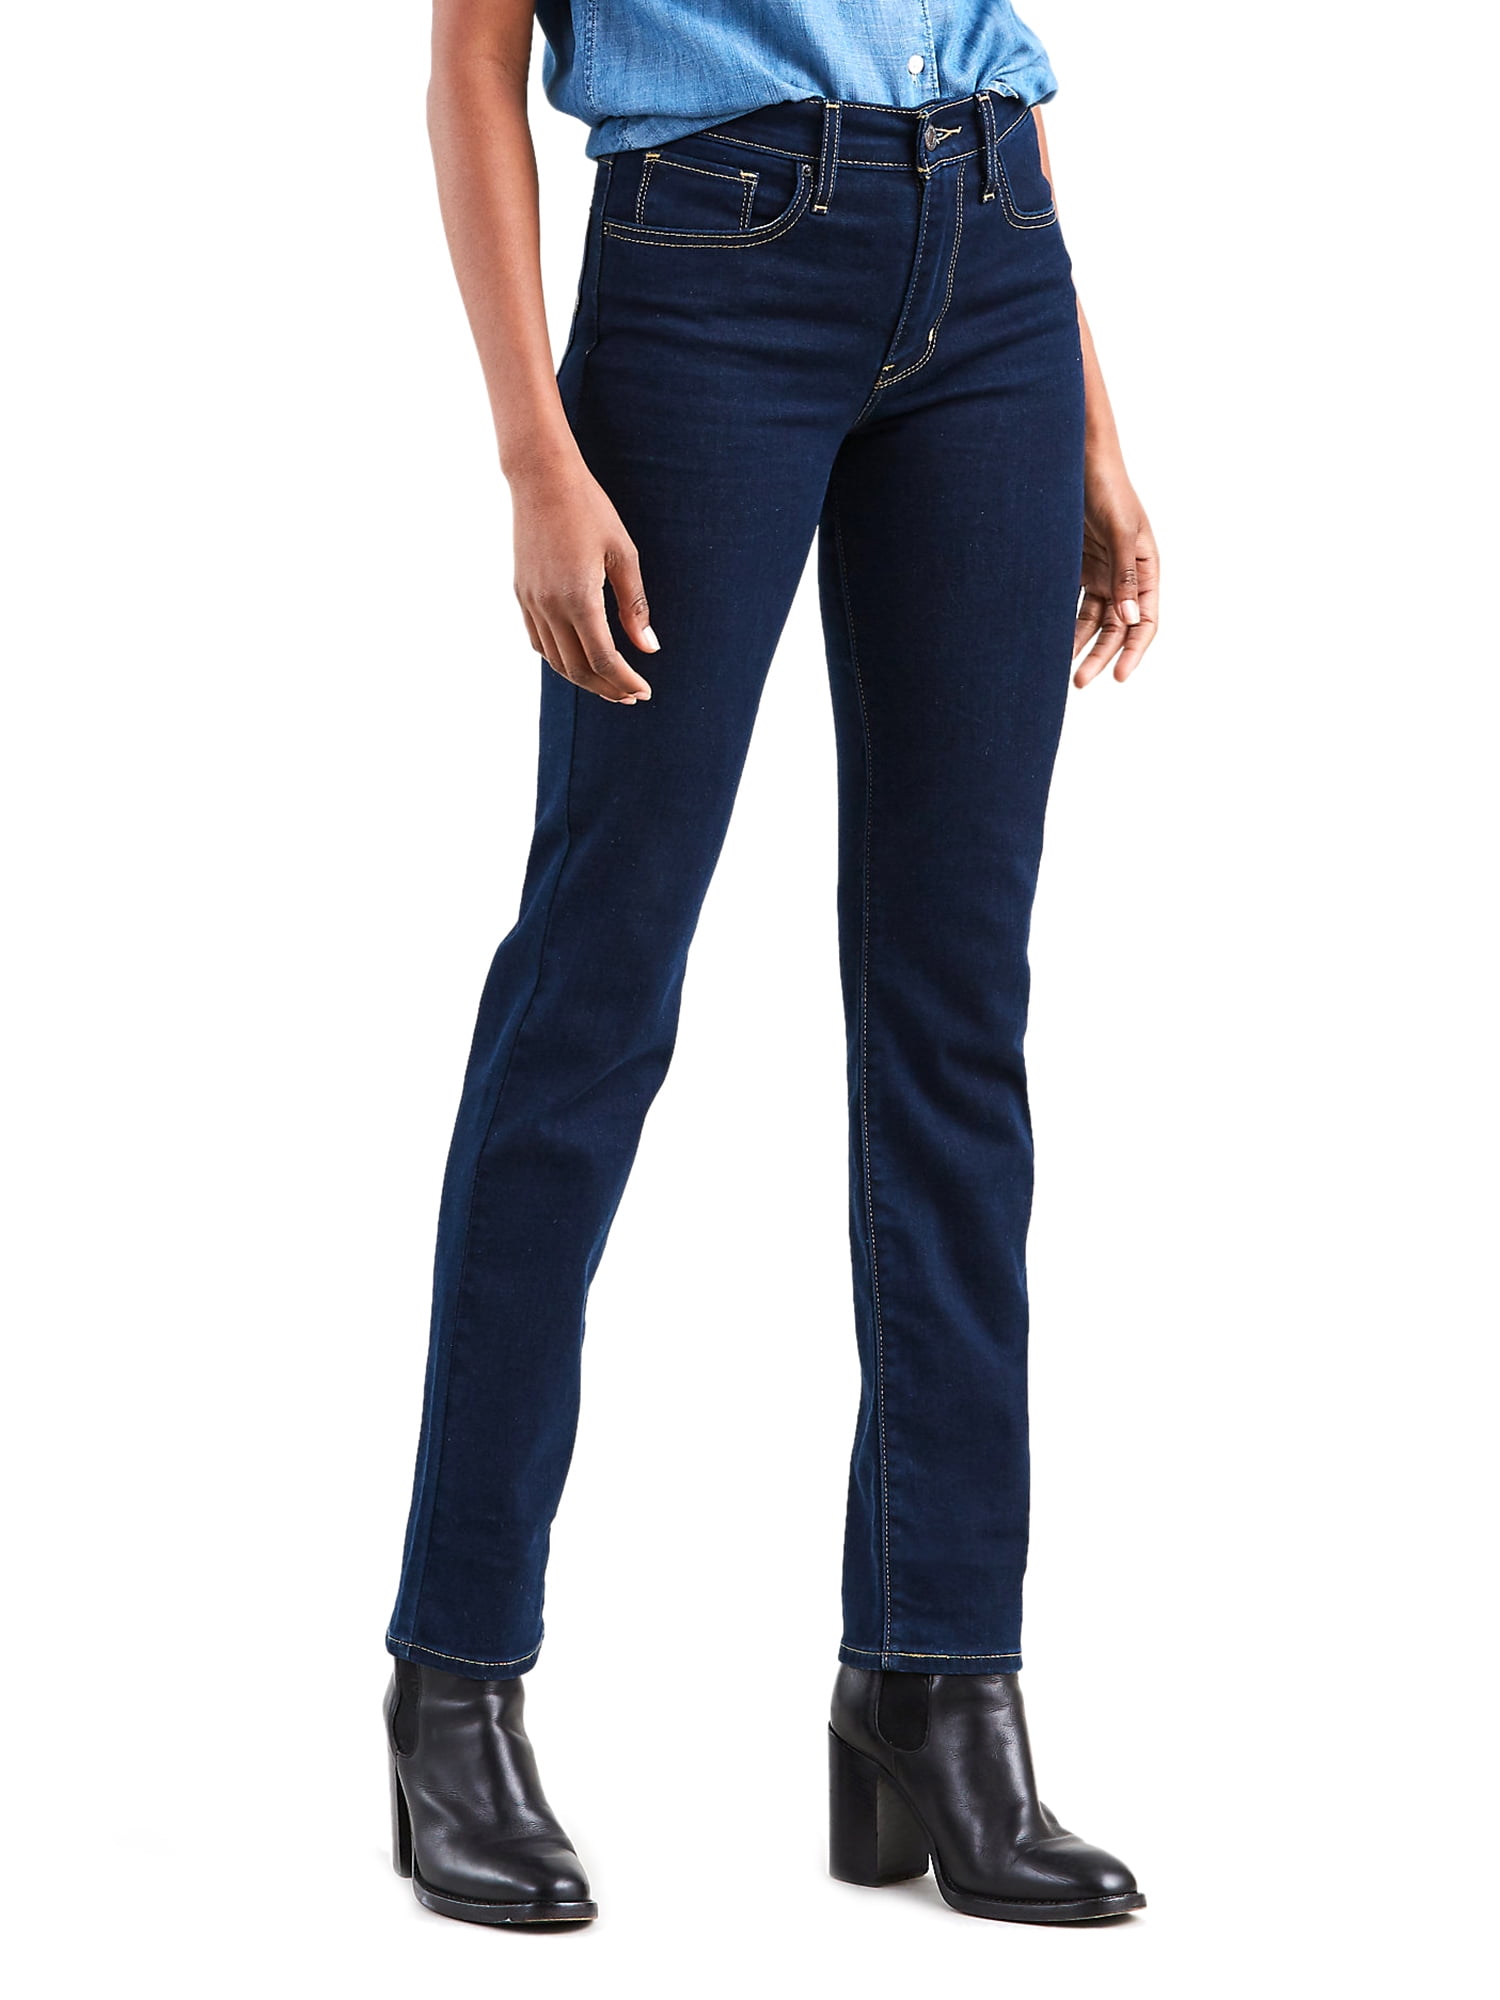 Levi's Original Red Tab Women's 724 High-Rise Straight Jeans